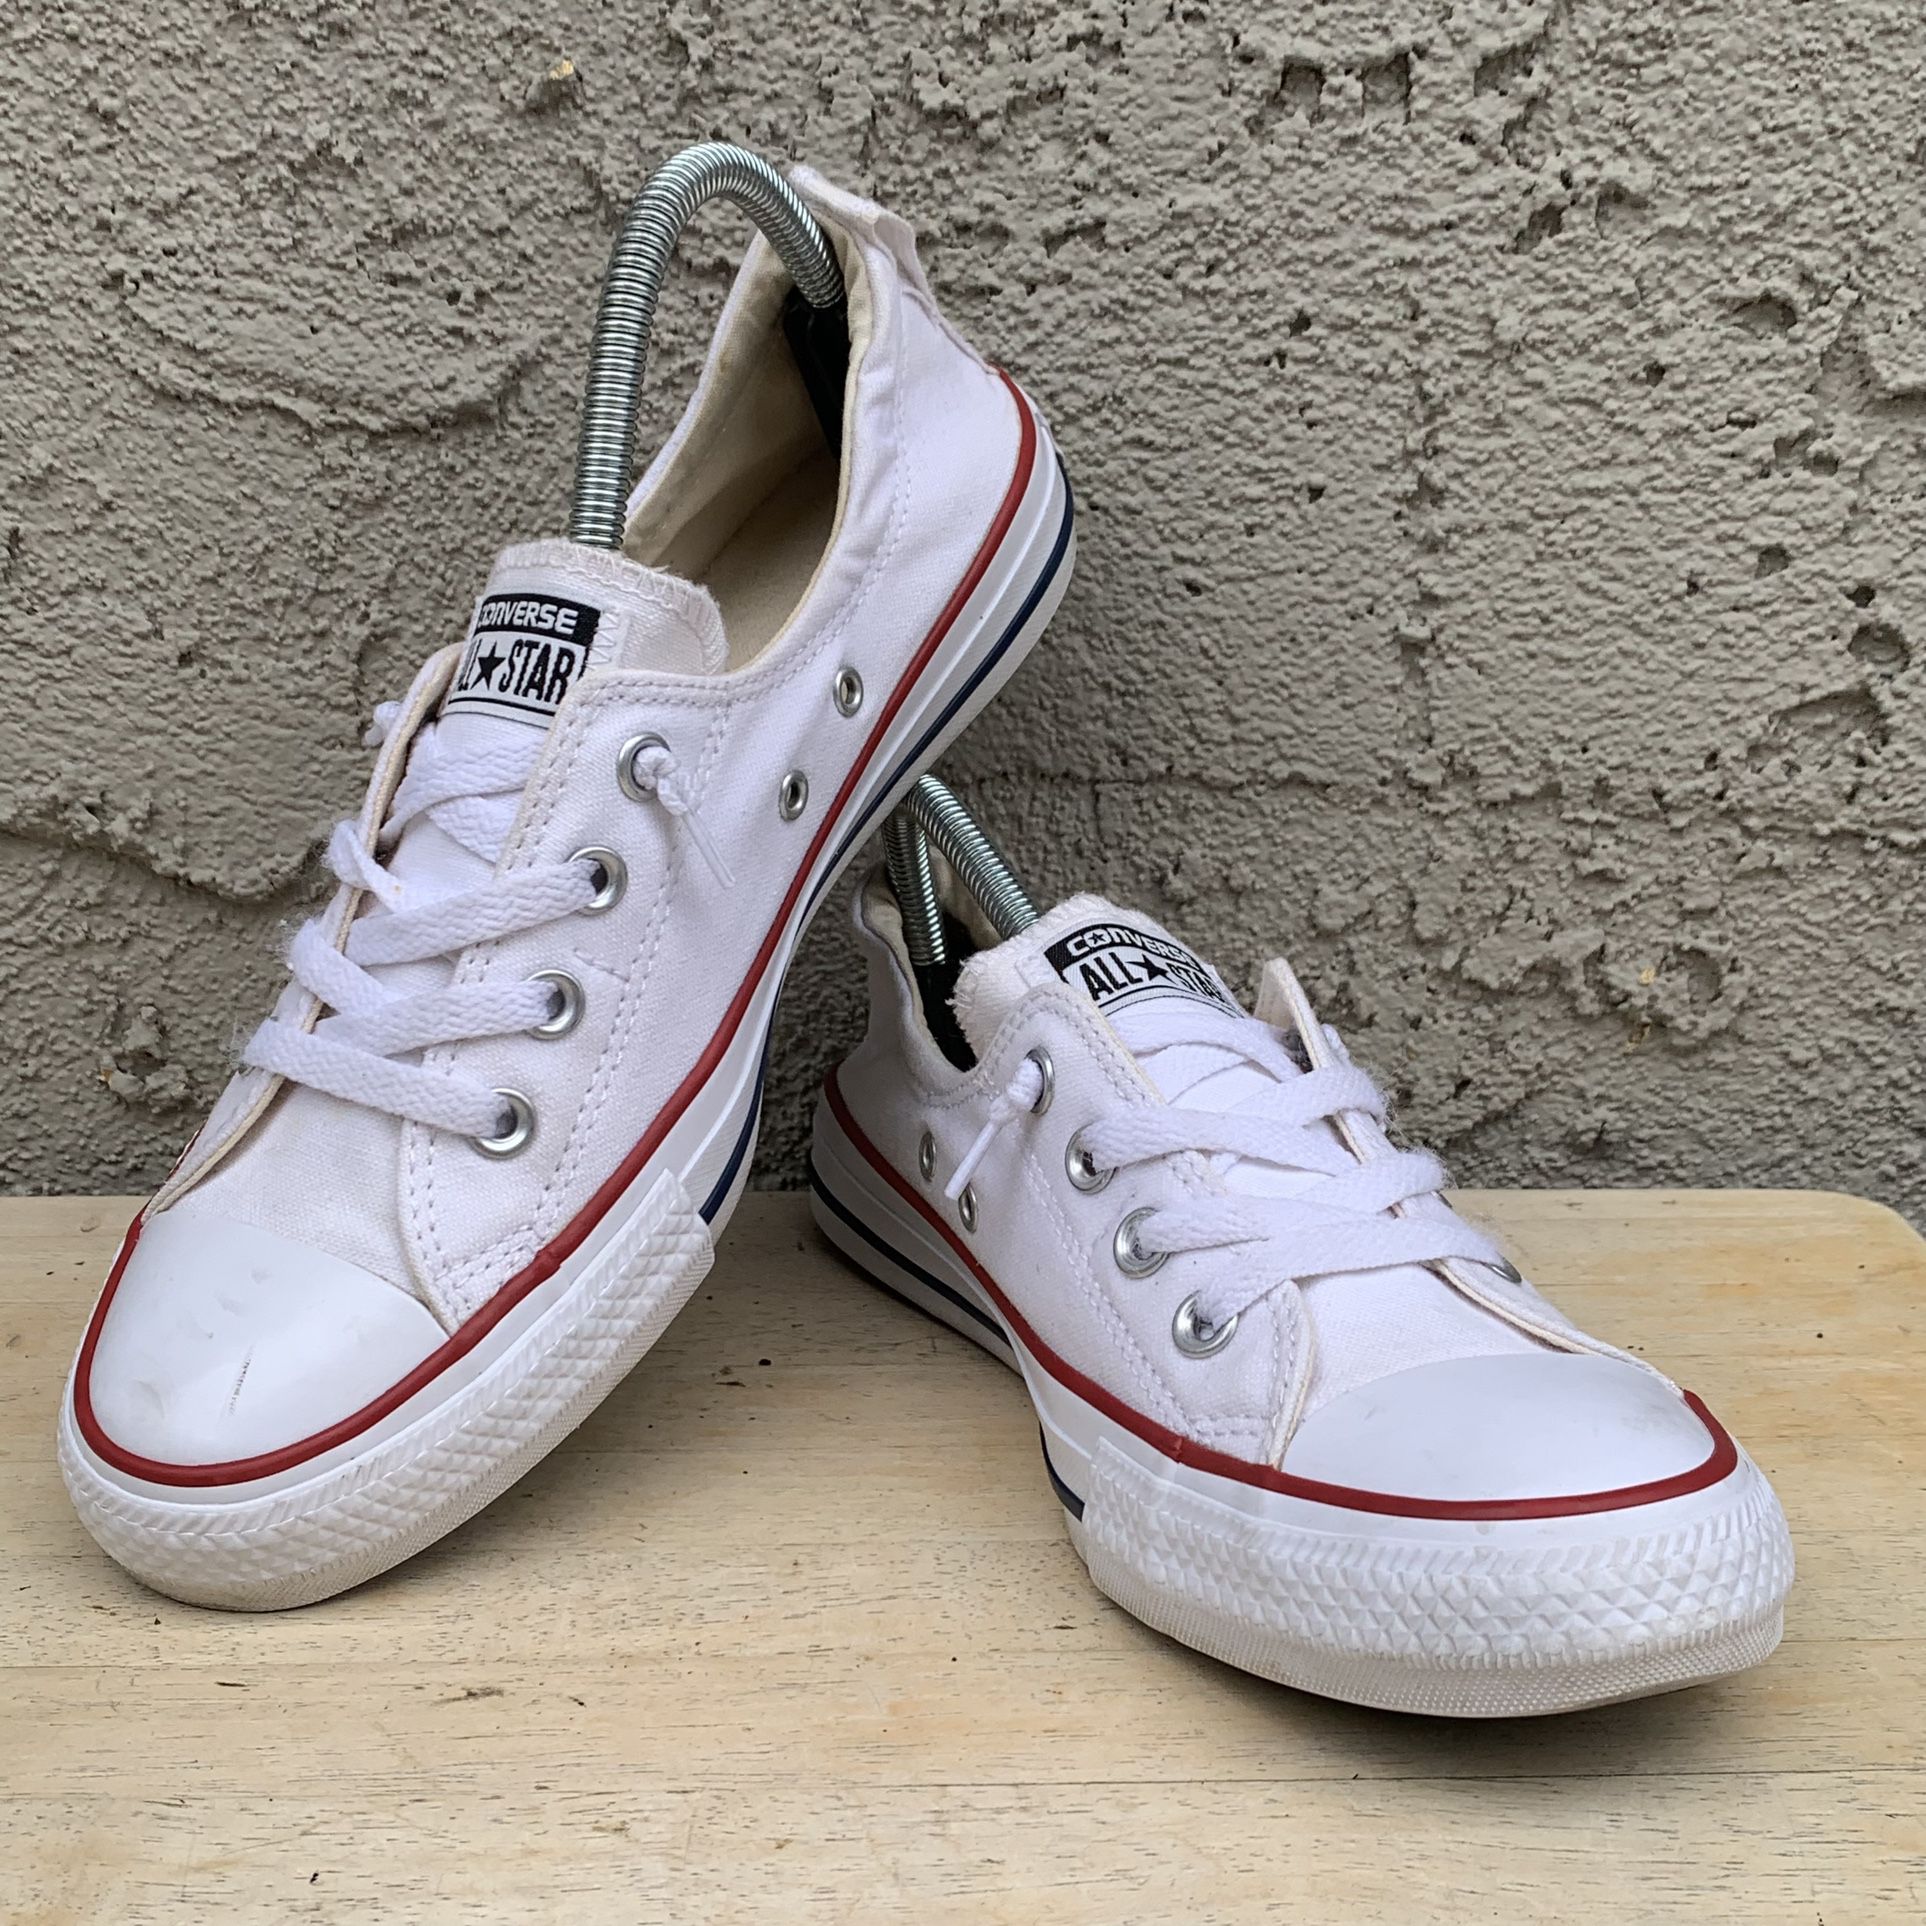 Converse All Star Shoreline Womens Size 9 White Canvas Slip On Shoes 537084F